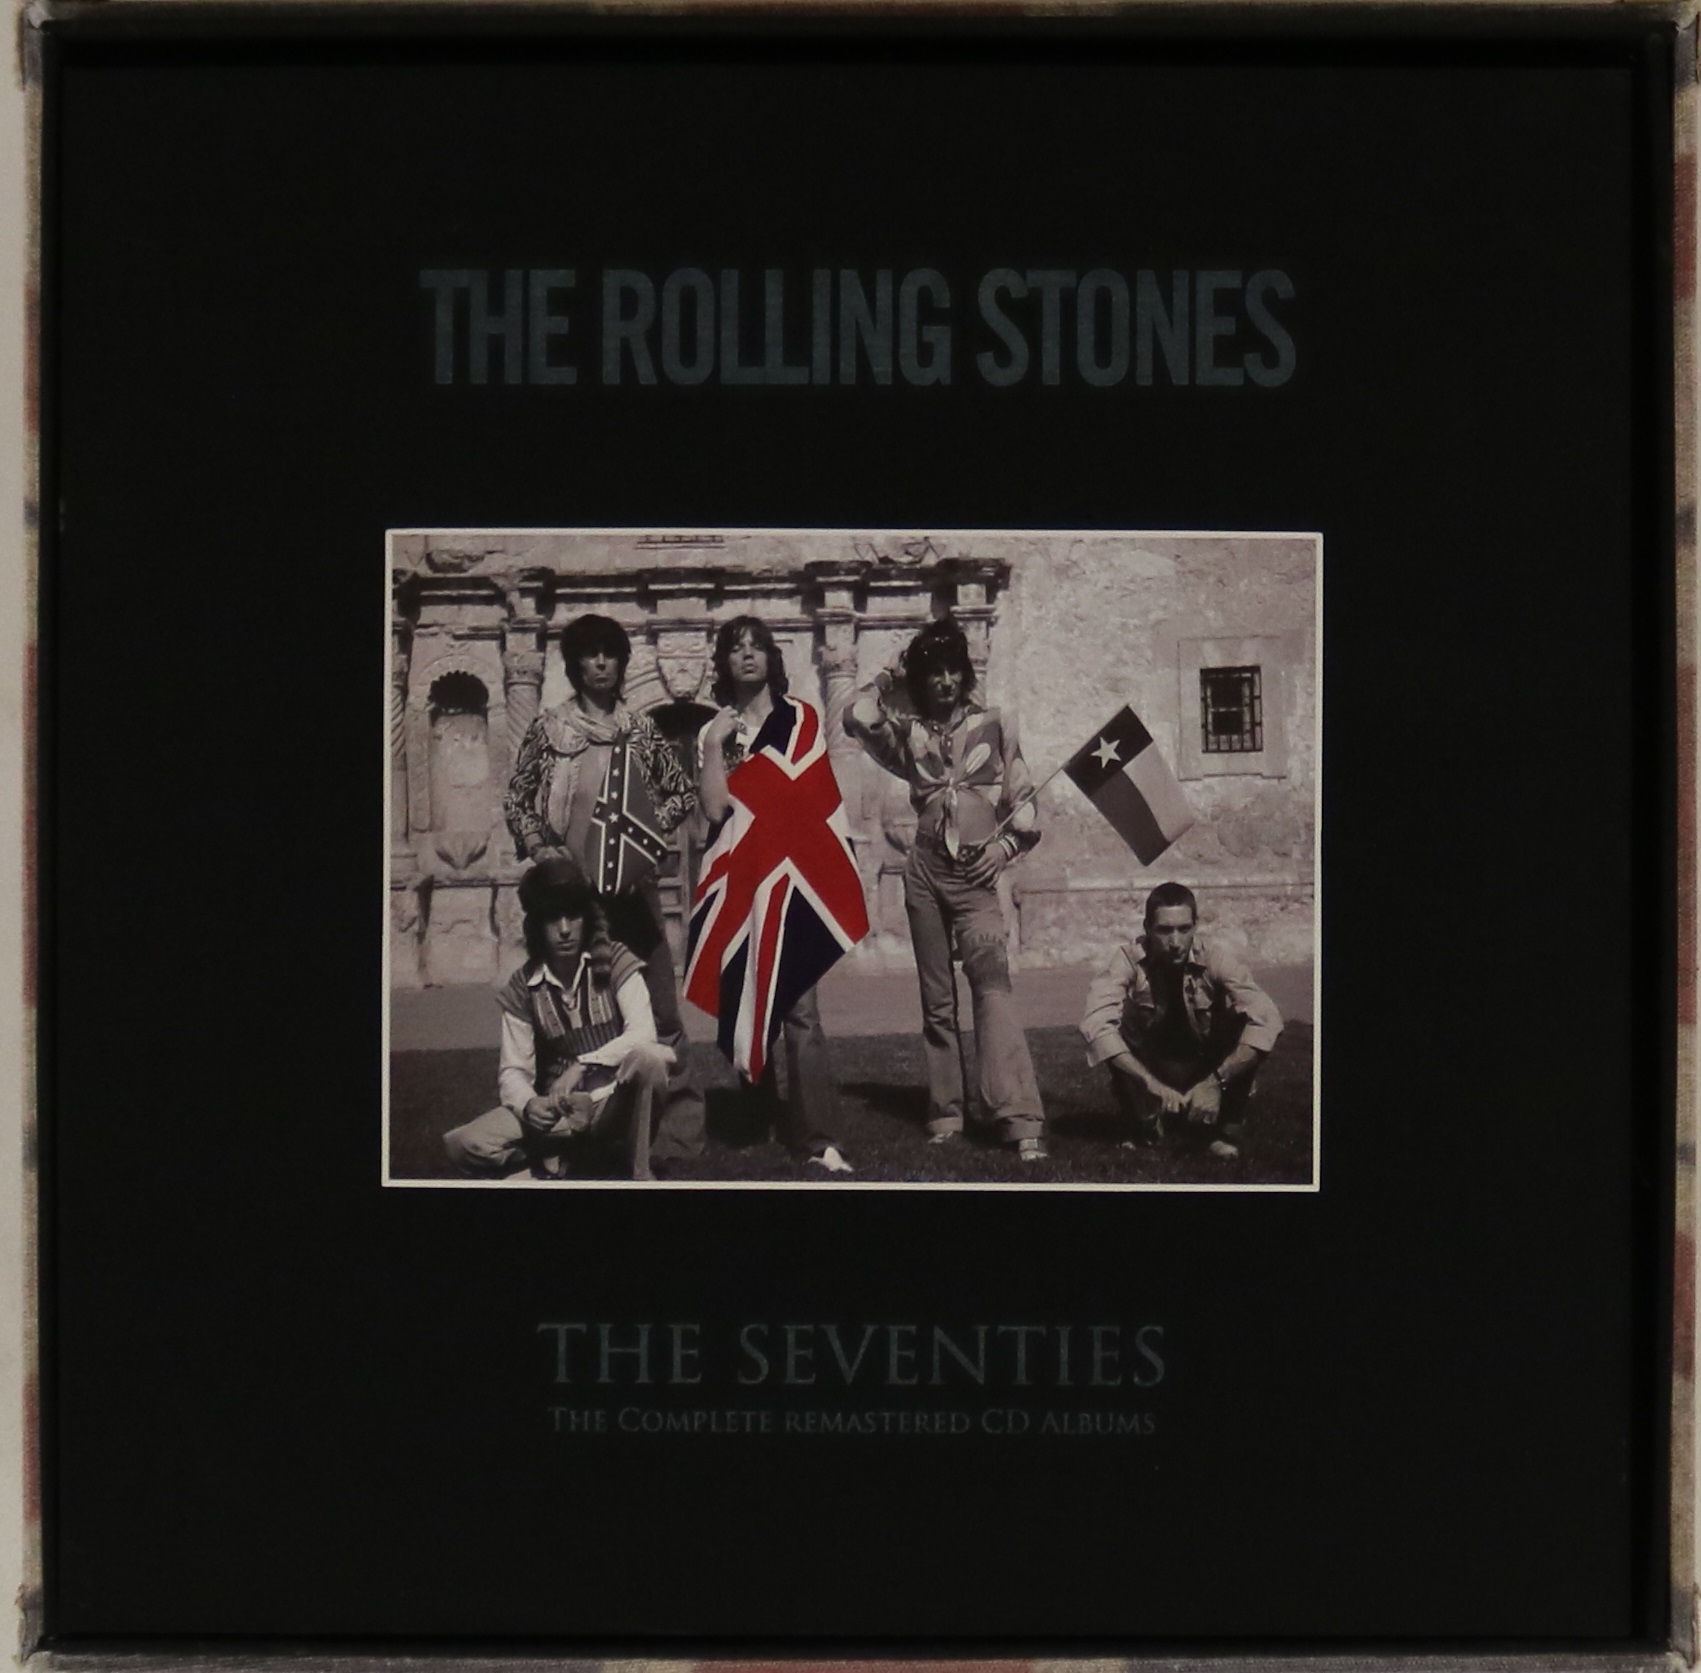 THE ROLLING STONES - YOU GET WHAT YOU NEED (THE SEVENTIES COMPLETE REMASTERED) - CD BOX SET. - Image 3 of 5